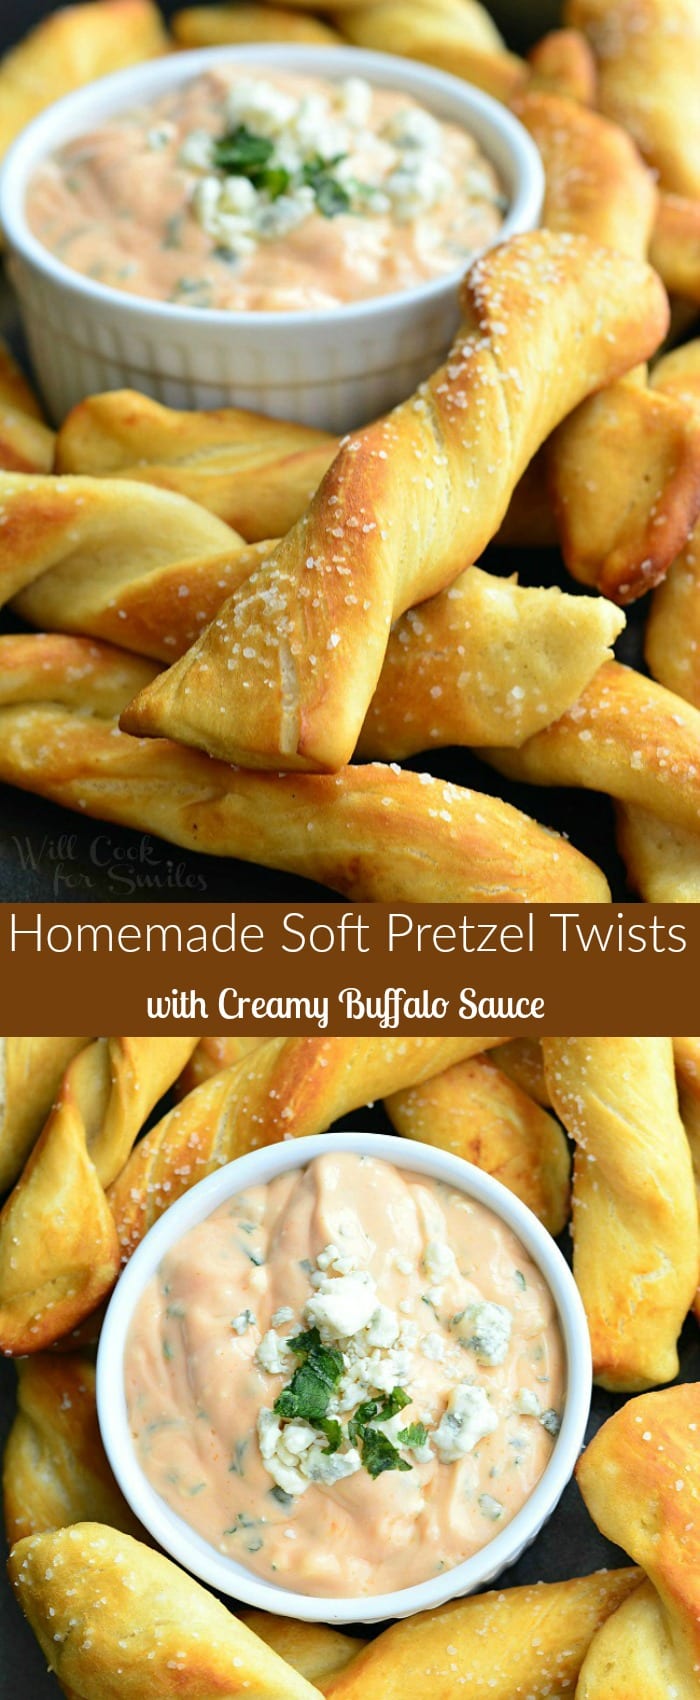 Homemade Soft Pretzel Twists with Creamy Buffalo Sauce. Homemade soft, salted pretzels served with delicious creamy buffalo sauce made with Greek yogurt and blue cheese crumbles. #appetizer #snack #buffalo #pretzel #homemade #partyfood #dip